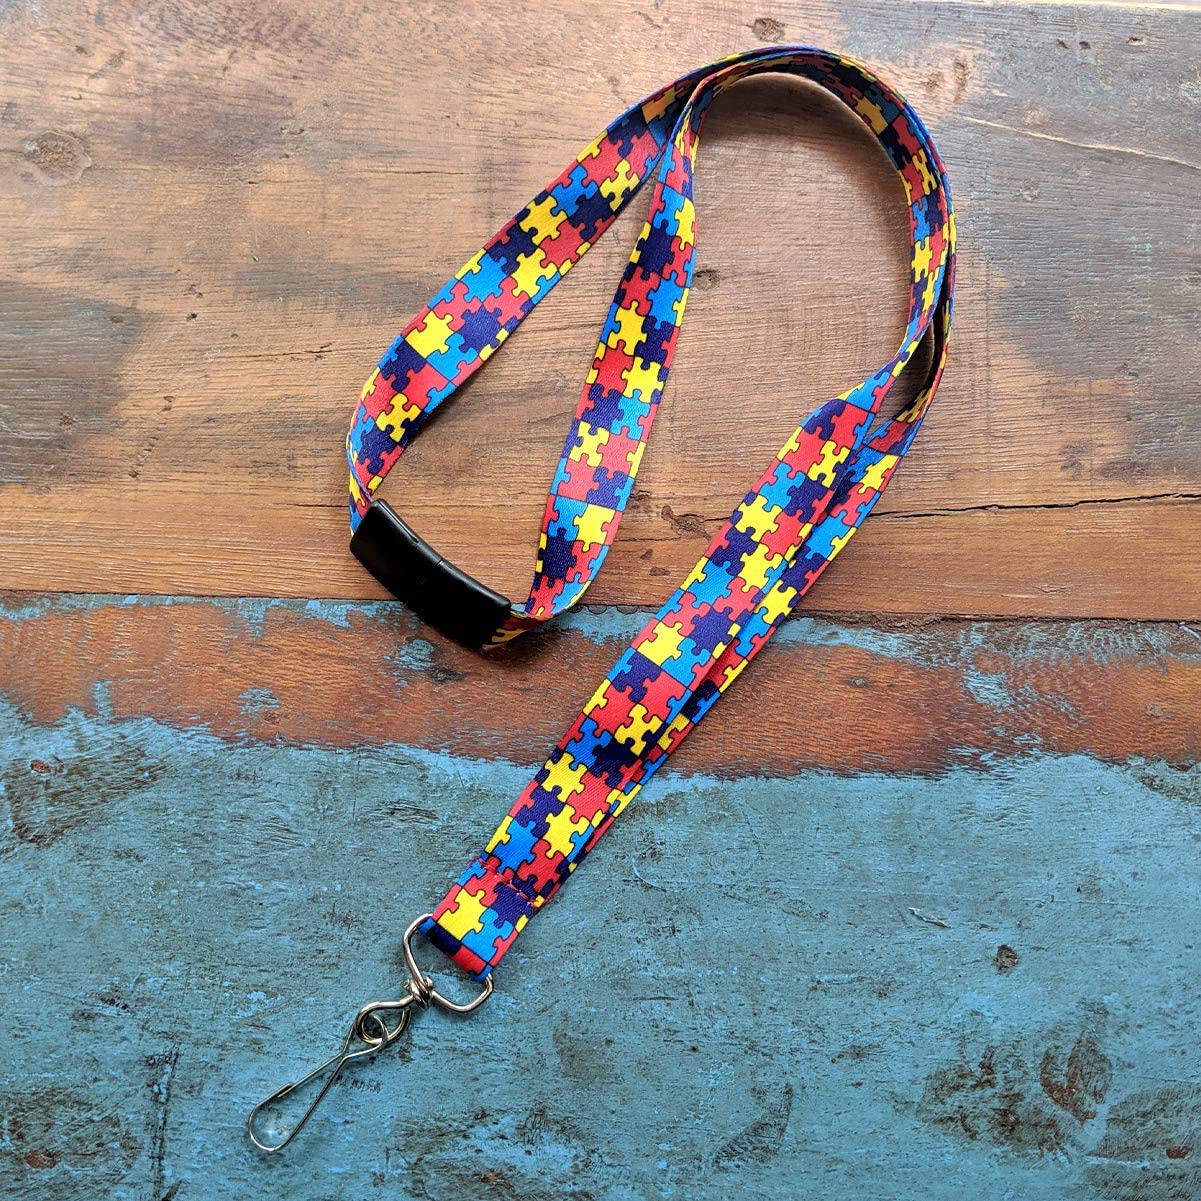 An Autism Awareness Flat Breakaway Lanyard With Swivel Hook (2138-5281, 2138-5282) with a colorful puzzle piece pattern, featuring a sturdy swivel hook at the end, is laid on a weathered wooden and blue surface.